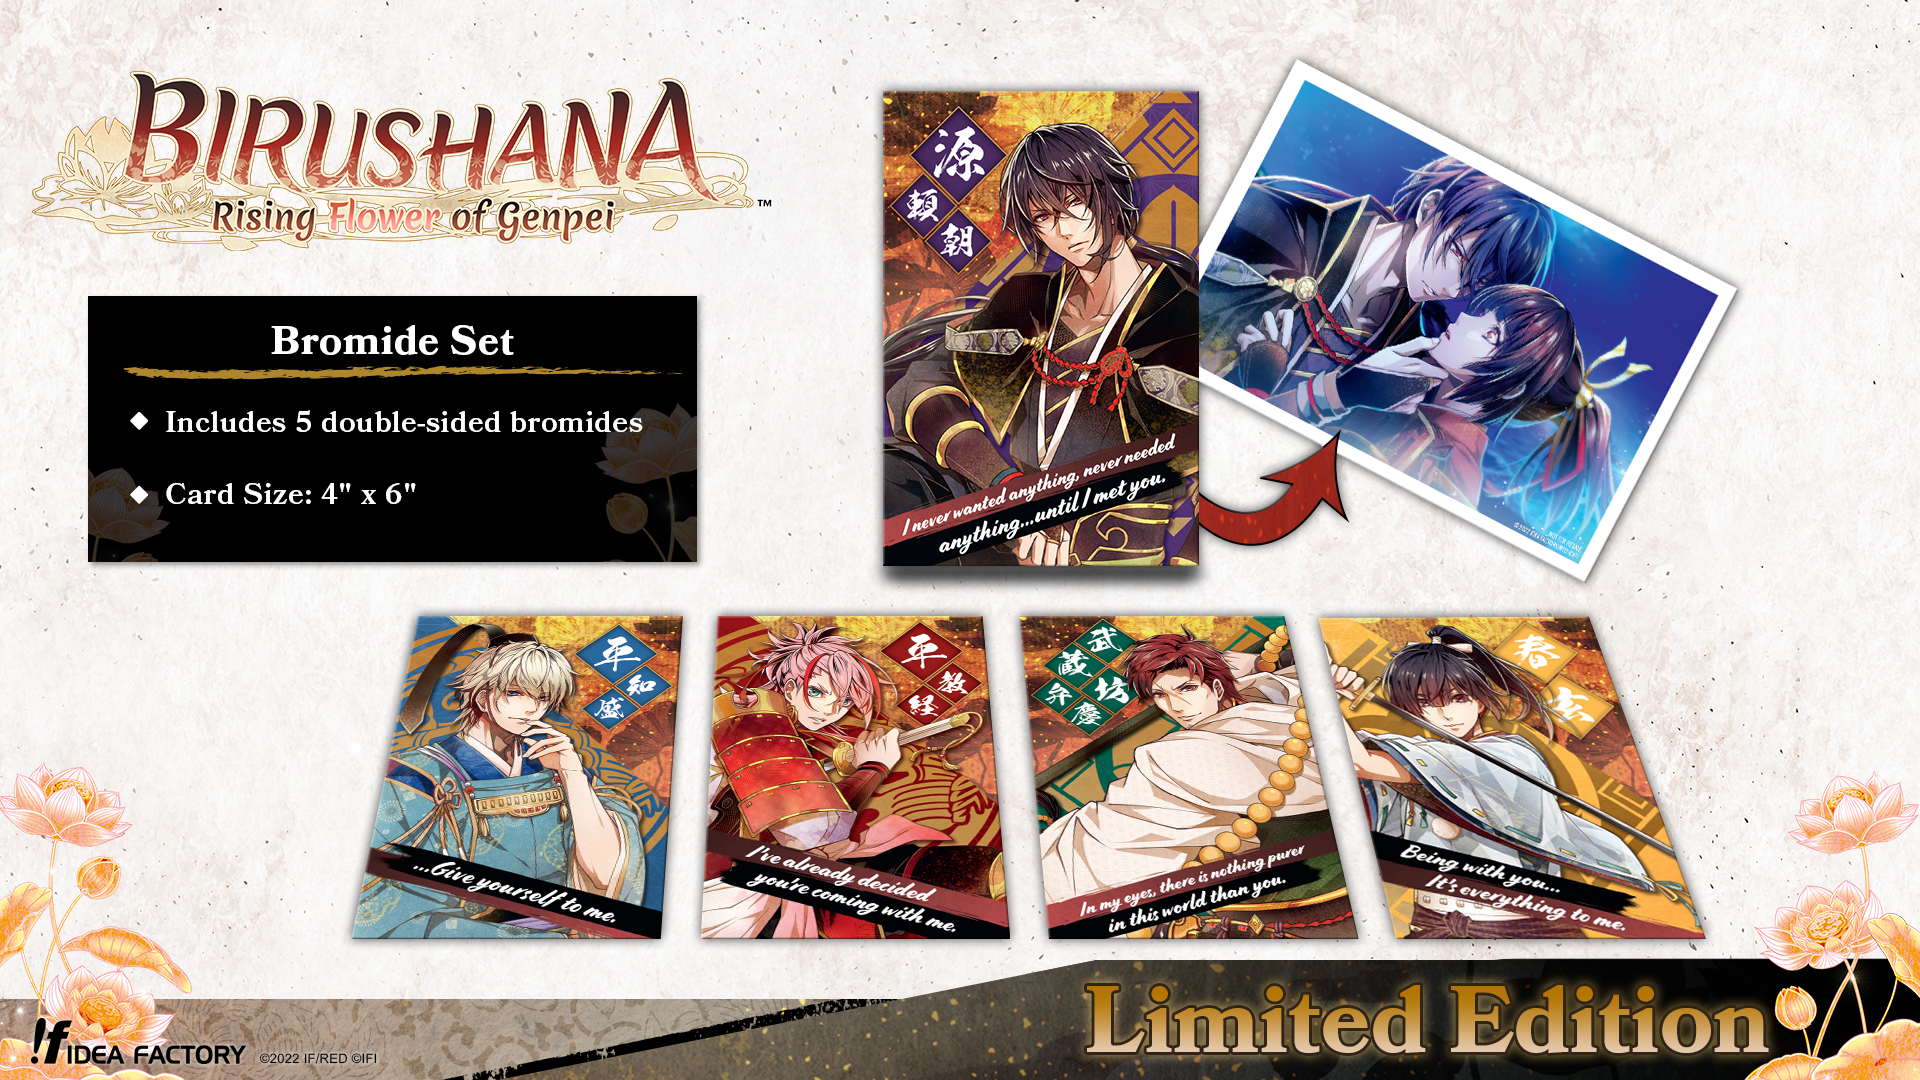 Birushana: Rising Flower of Genpei Limited Edition -SOLD OUT!